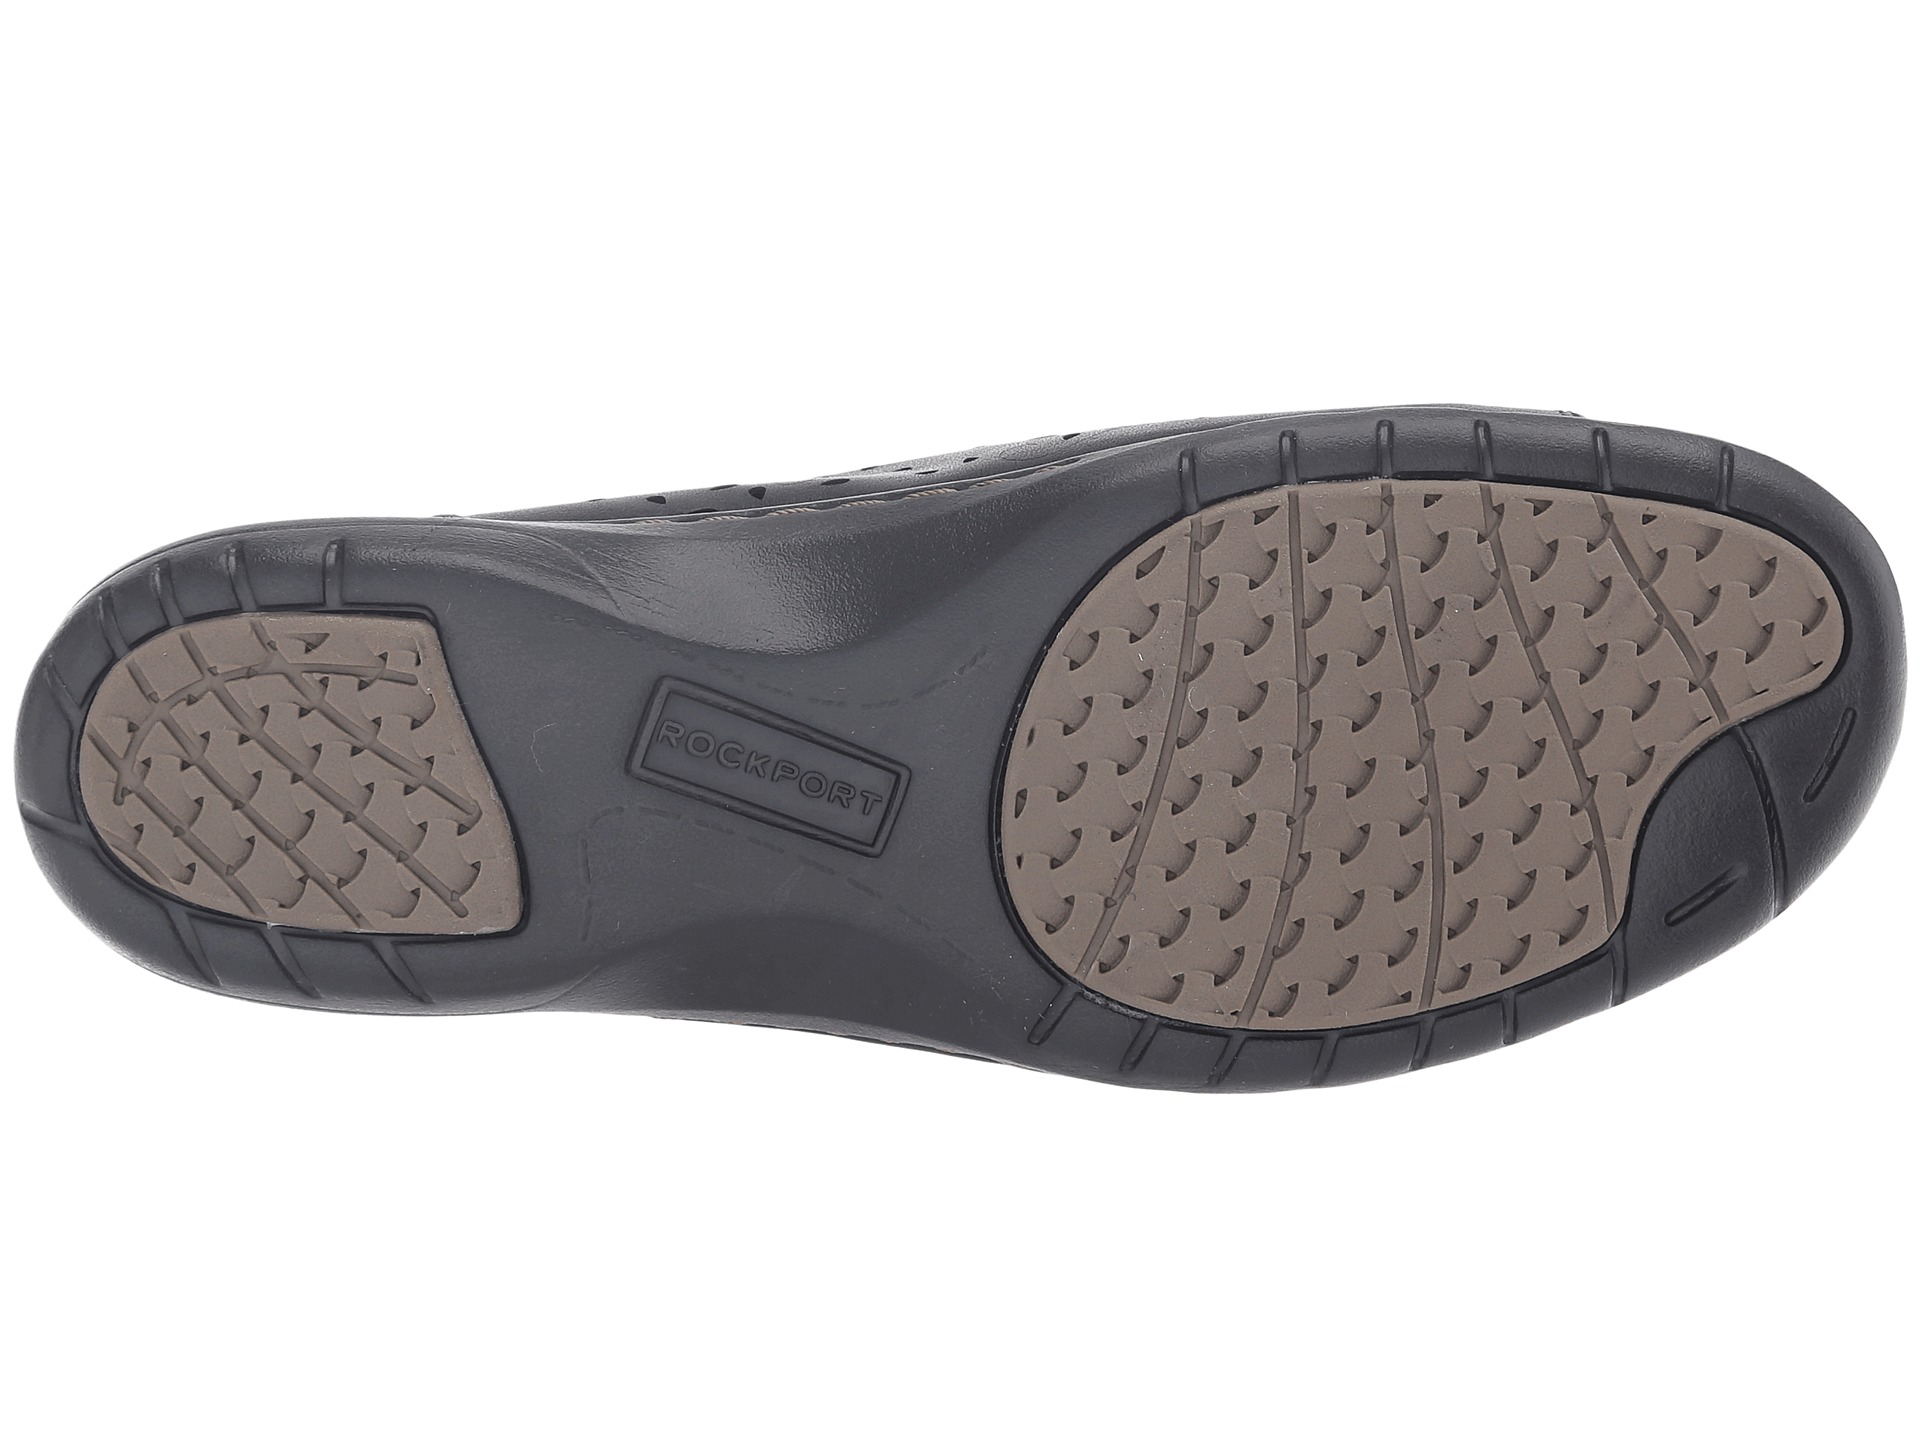 Rockport Cobb Hill Collection Cobb Hill Penfield Patrice Black - Zappos ...